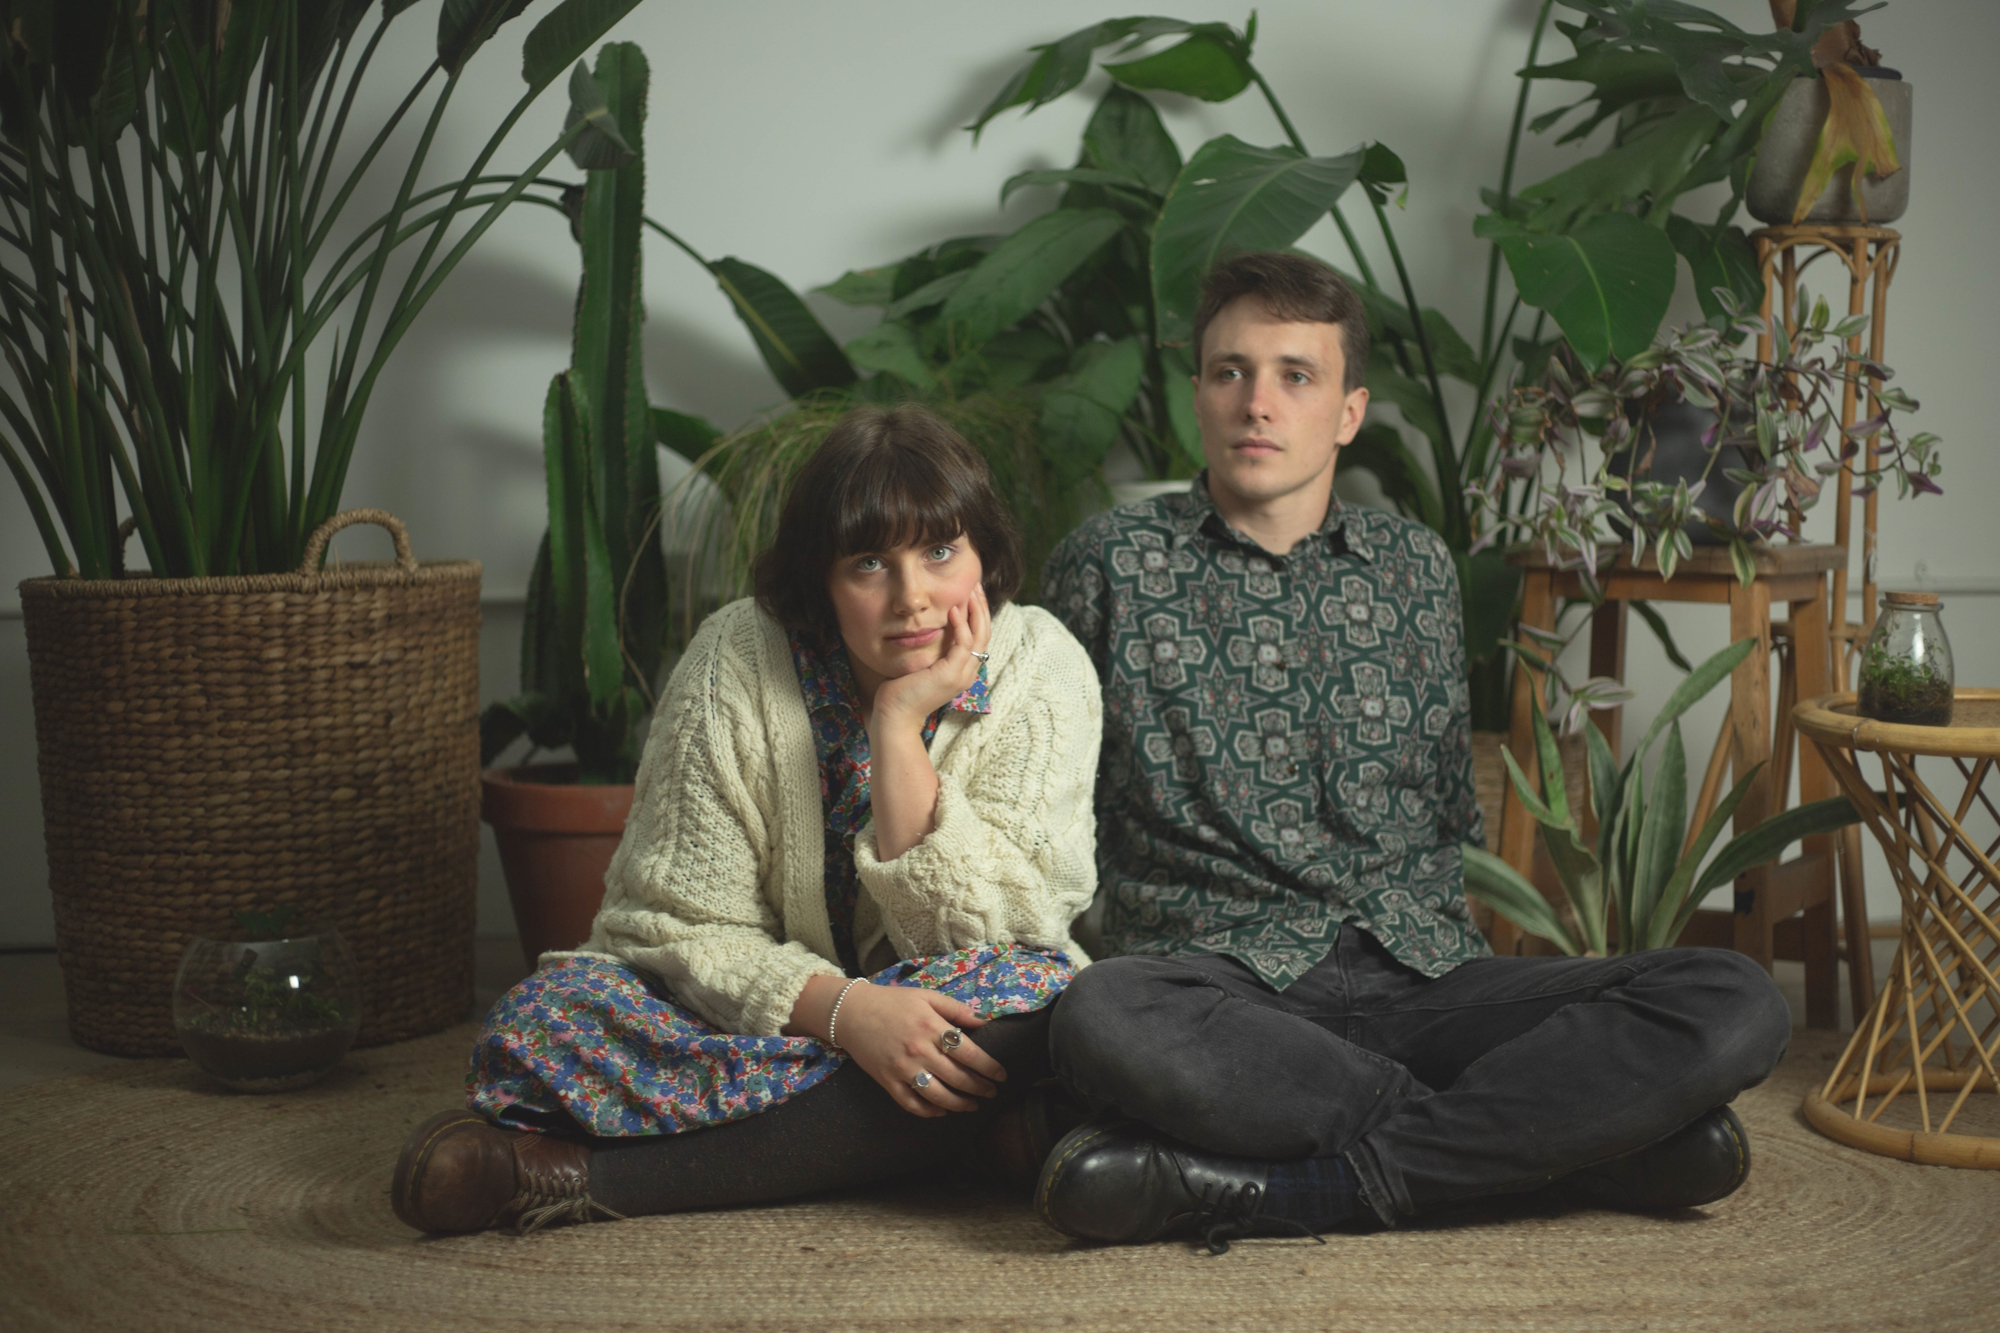 Bath-Based Alt-Folk Duo Humm Discuss Their Latest Single “Danced Alone (who I am when I’m in love),” Meeting as a Result of Failed A-Levels, and Recording in Sir Paul McCartney’s Childhood Home